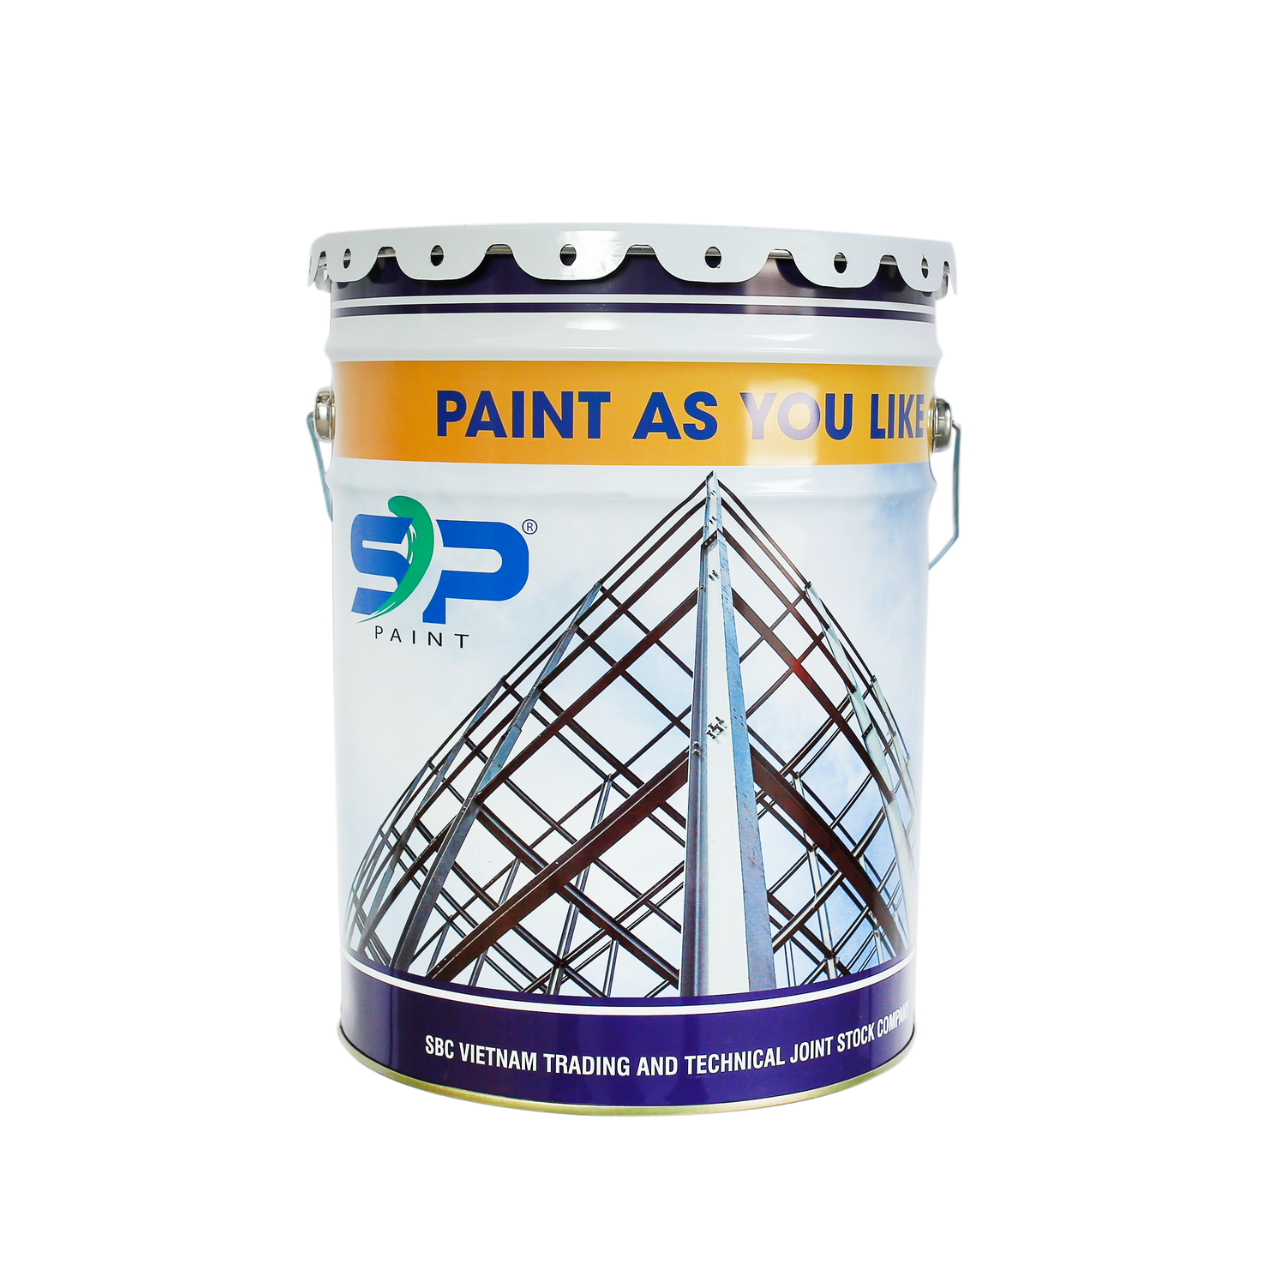 SP ® CRYL COATING PAINT ON STAINLESS STEEL GARVANIZED STEEL